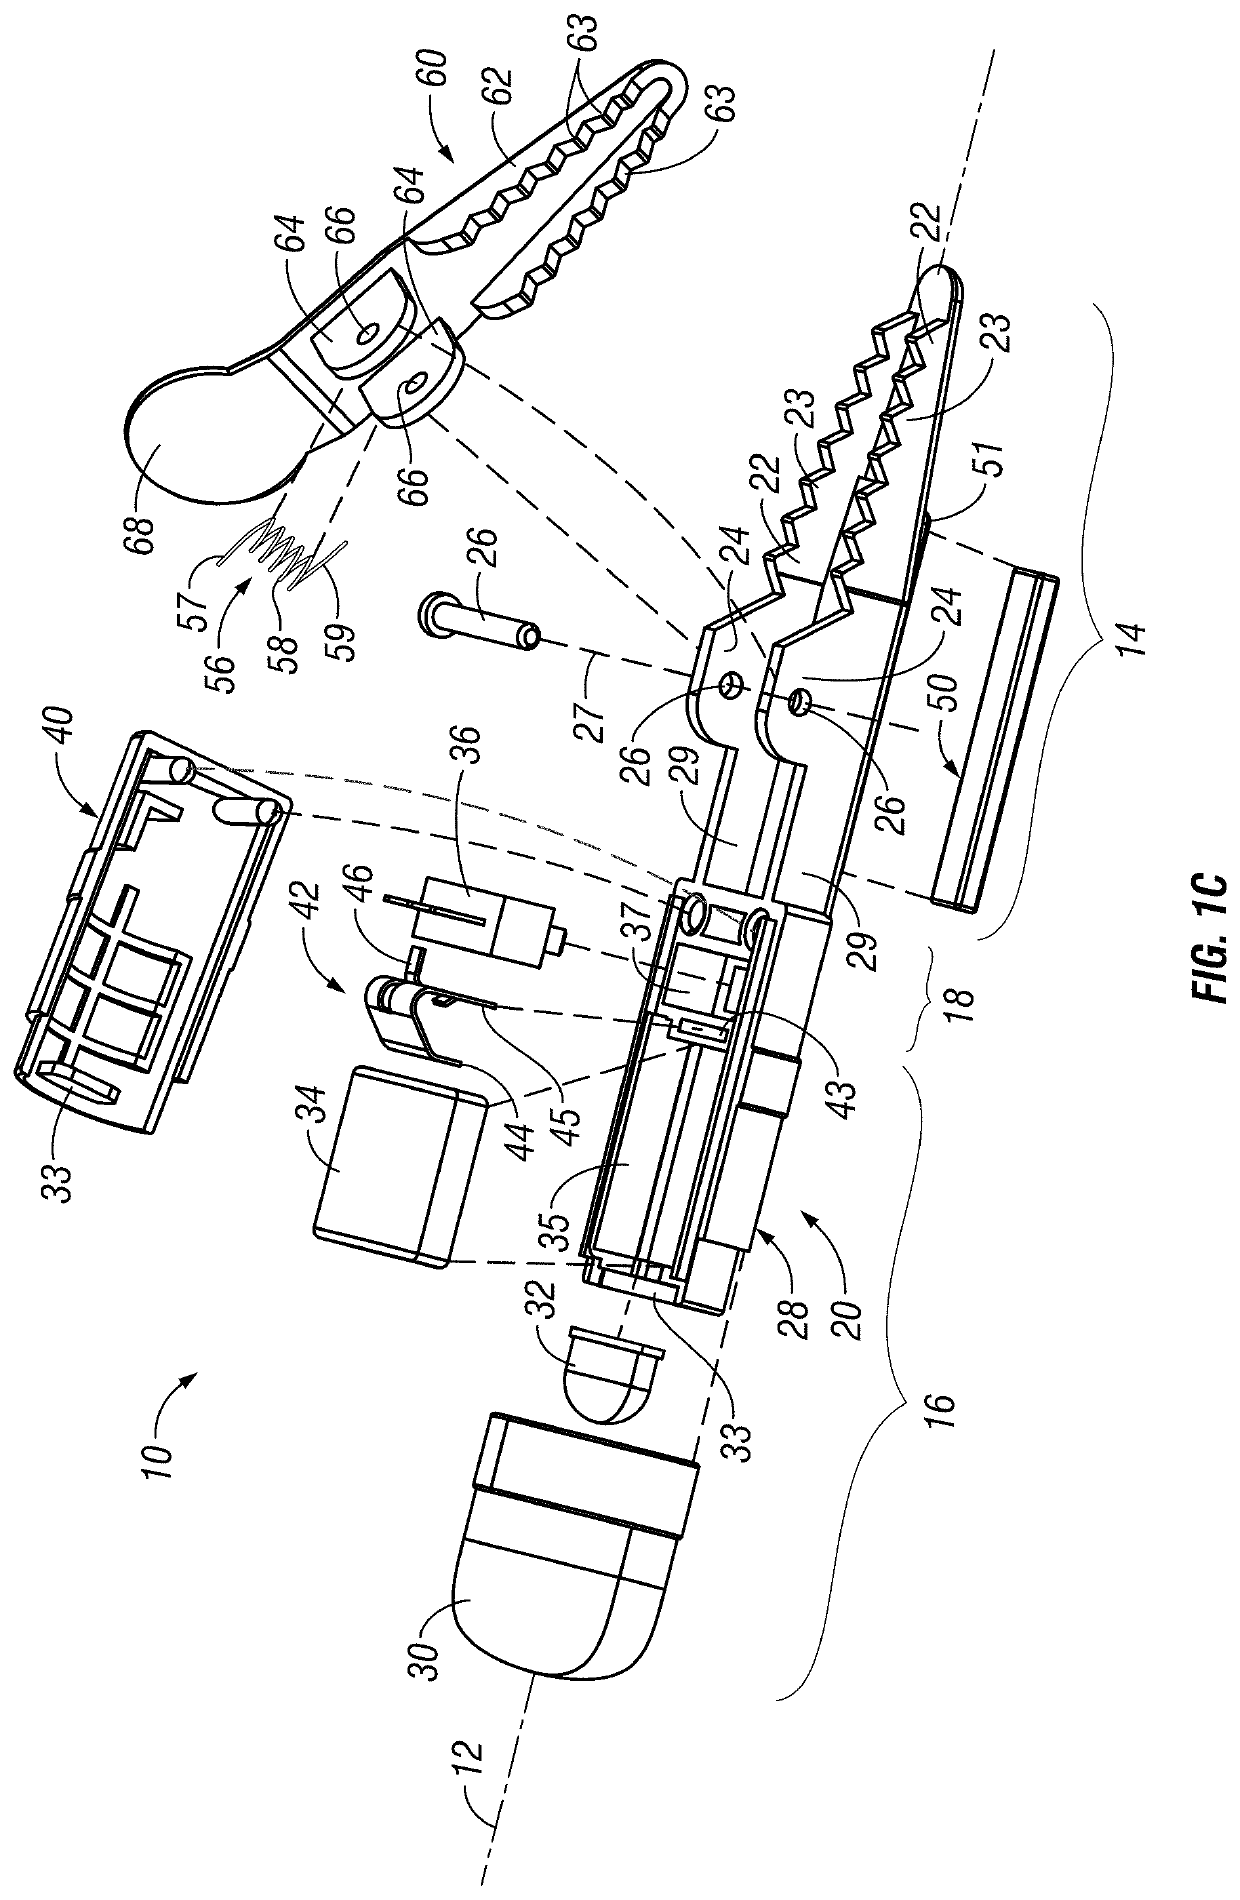 Multi-function tool, kit, and methods of using the same